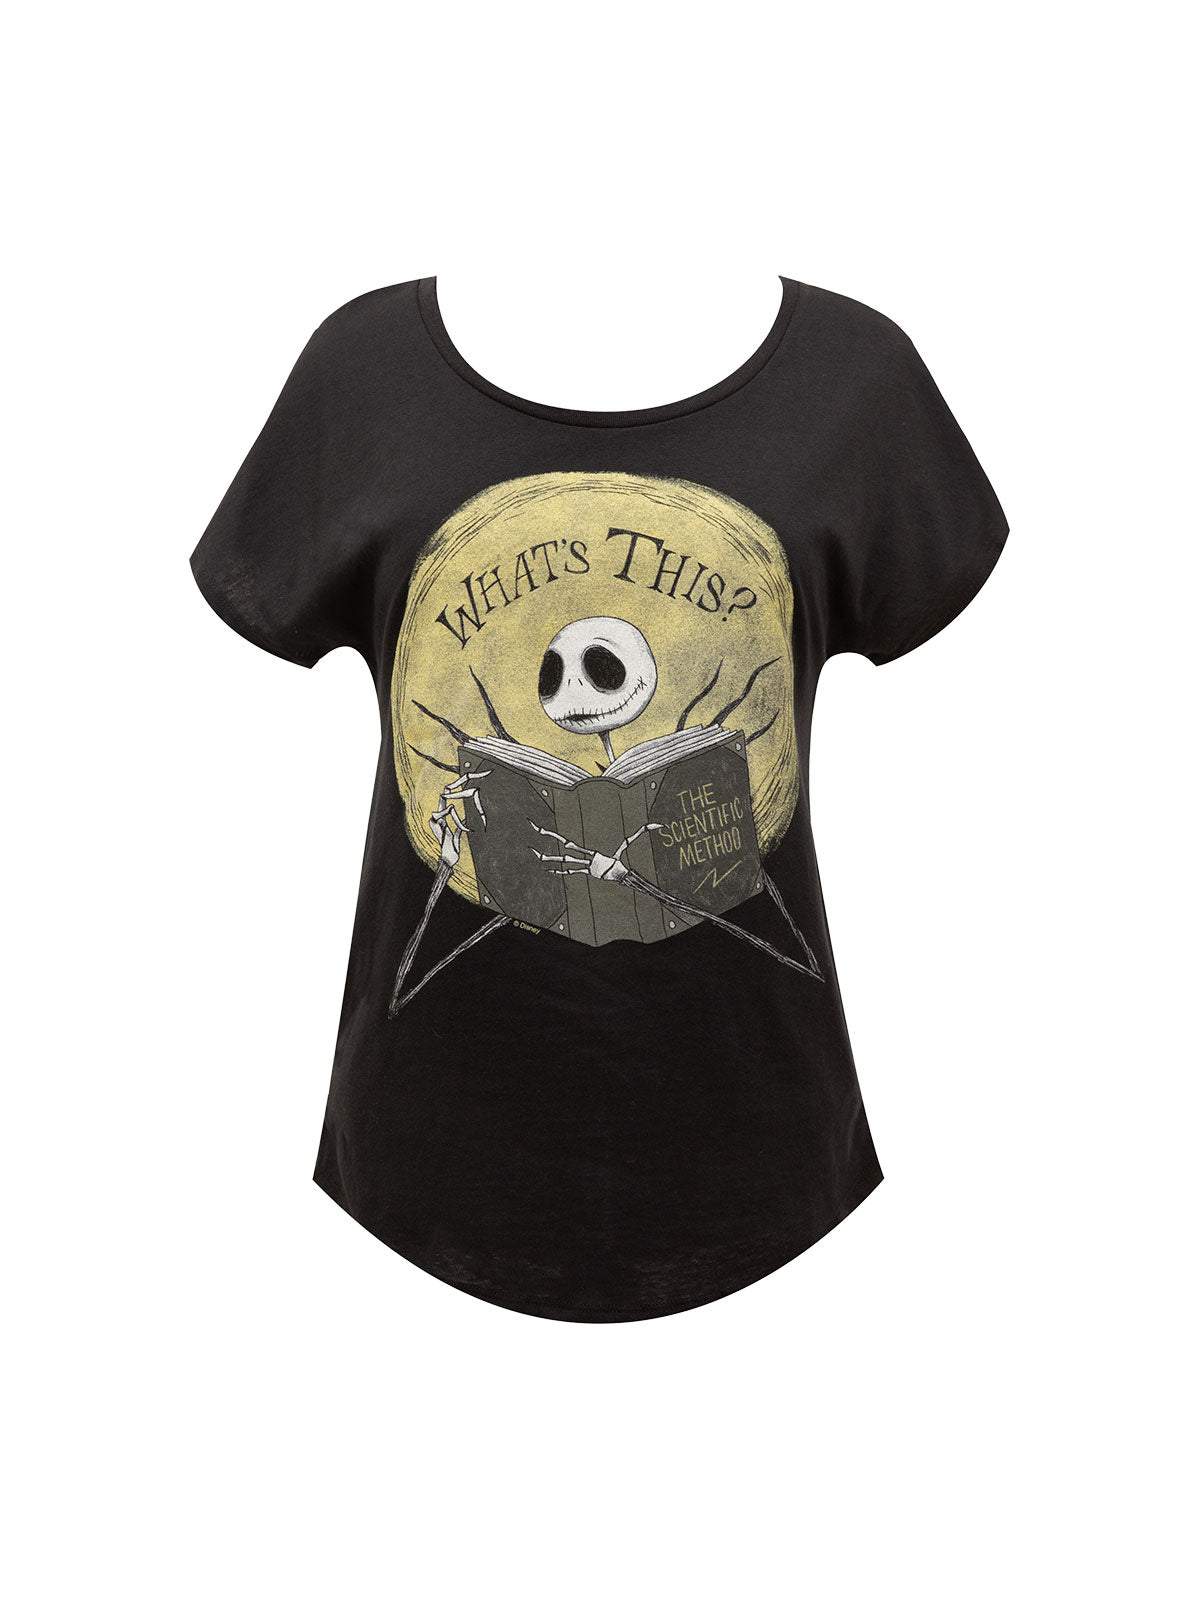 Disney The Nightmare Before Christmas t-shirt women\'s fit — Out relaxed Print of